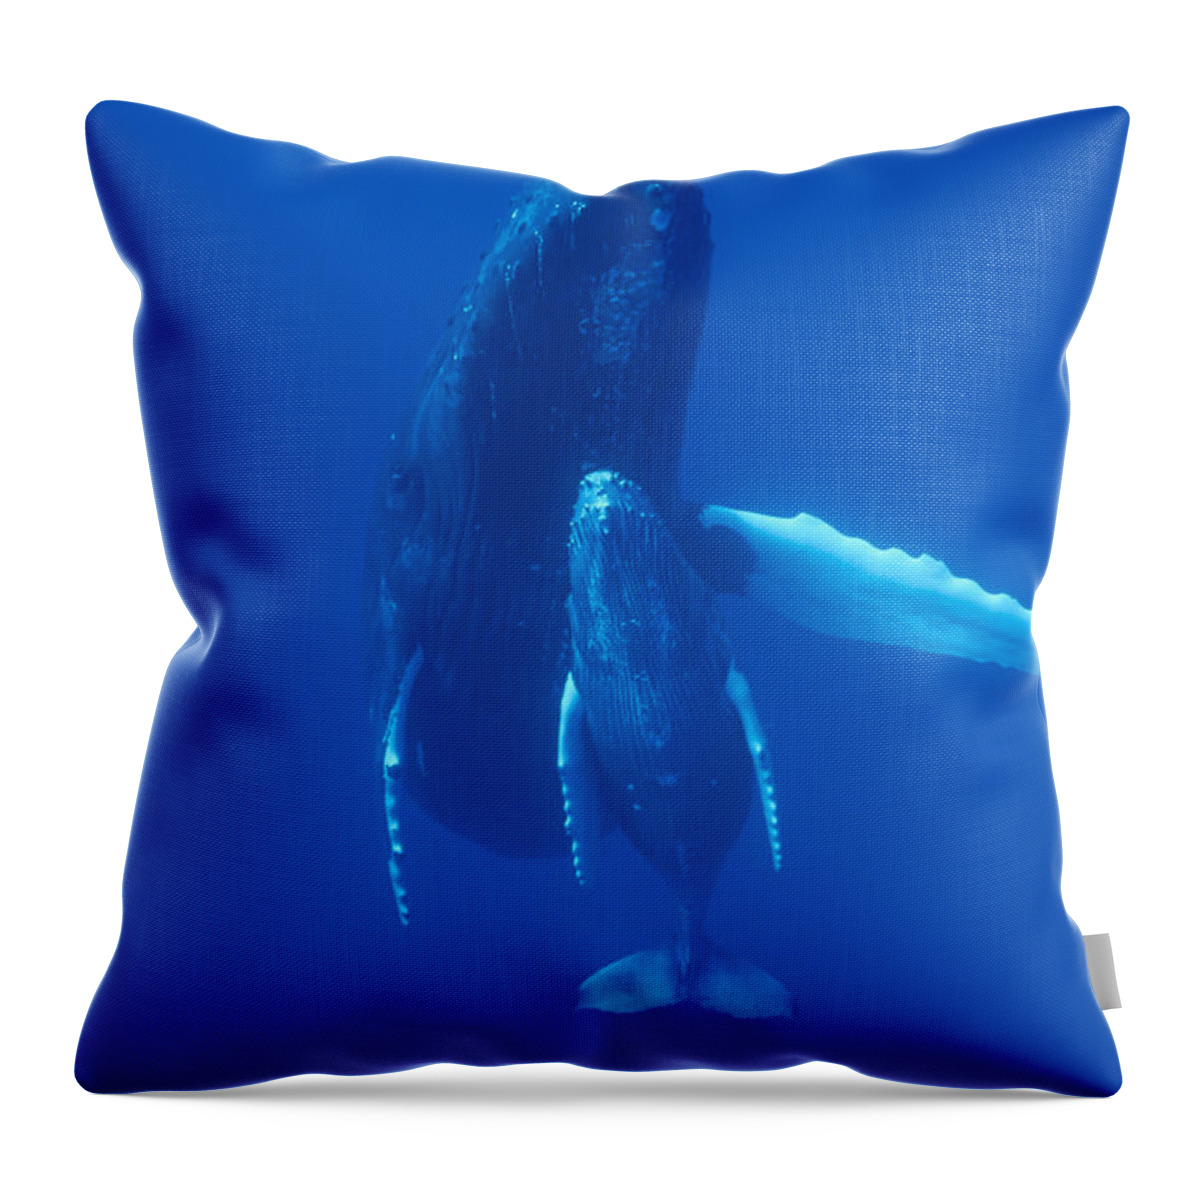 Feb0514 Throw Pillow featuring the photograph Humpback Whale And Calf Maui Hawaii by Flip Nicklin